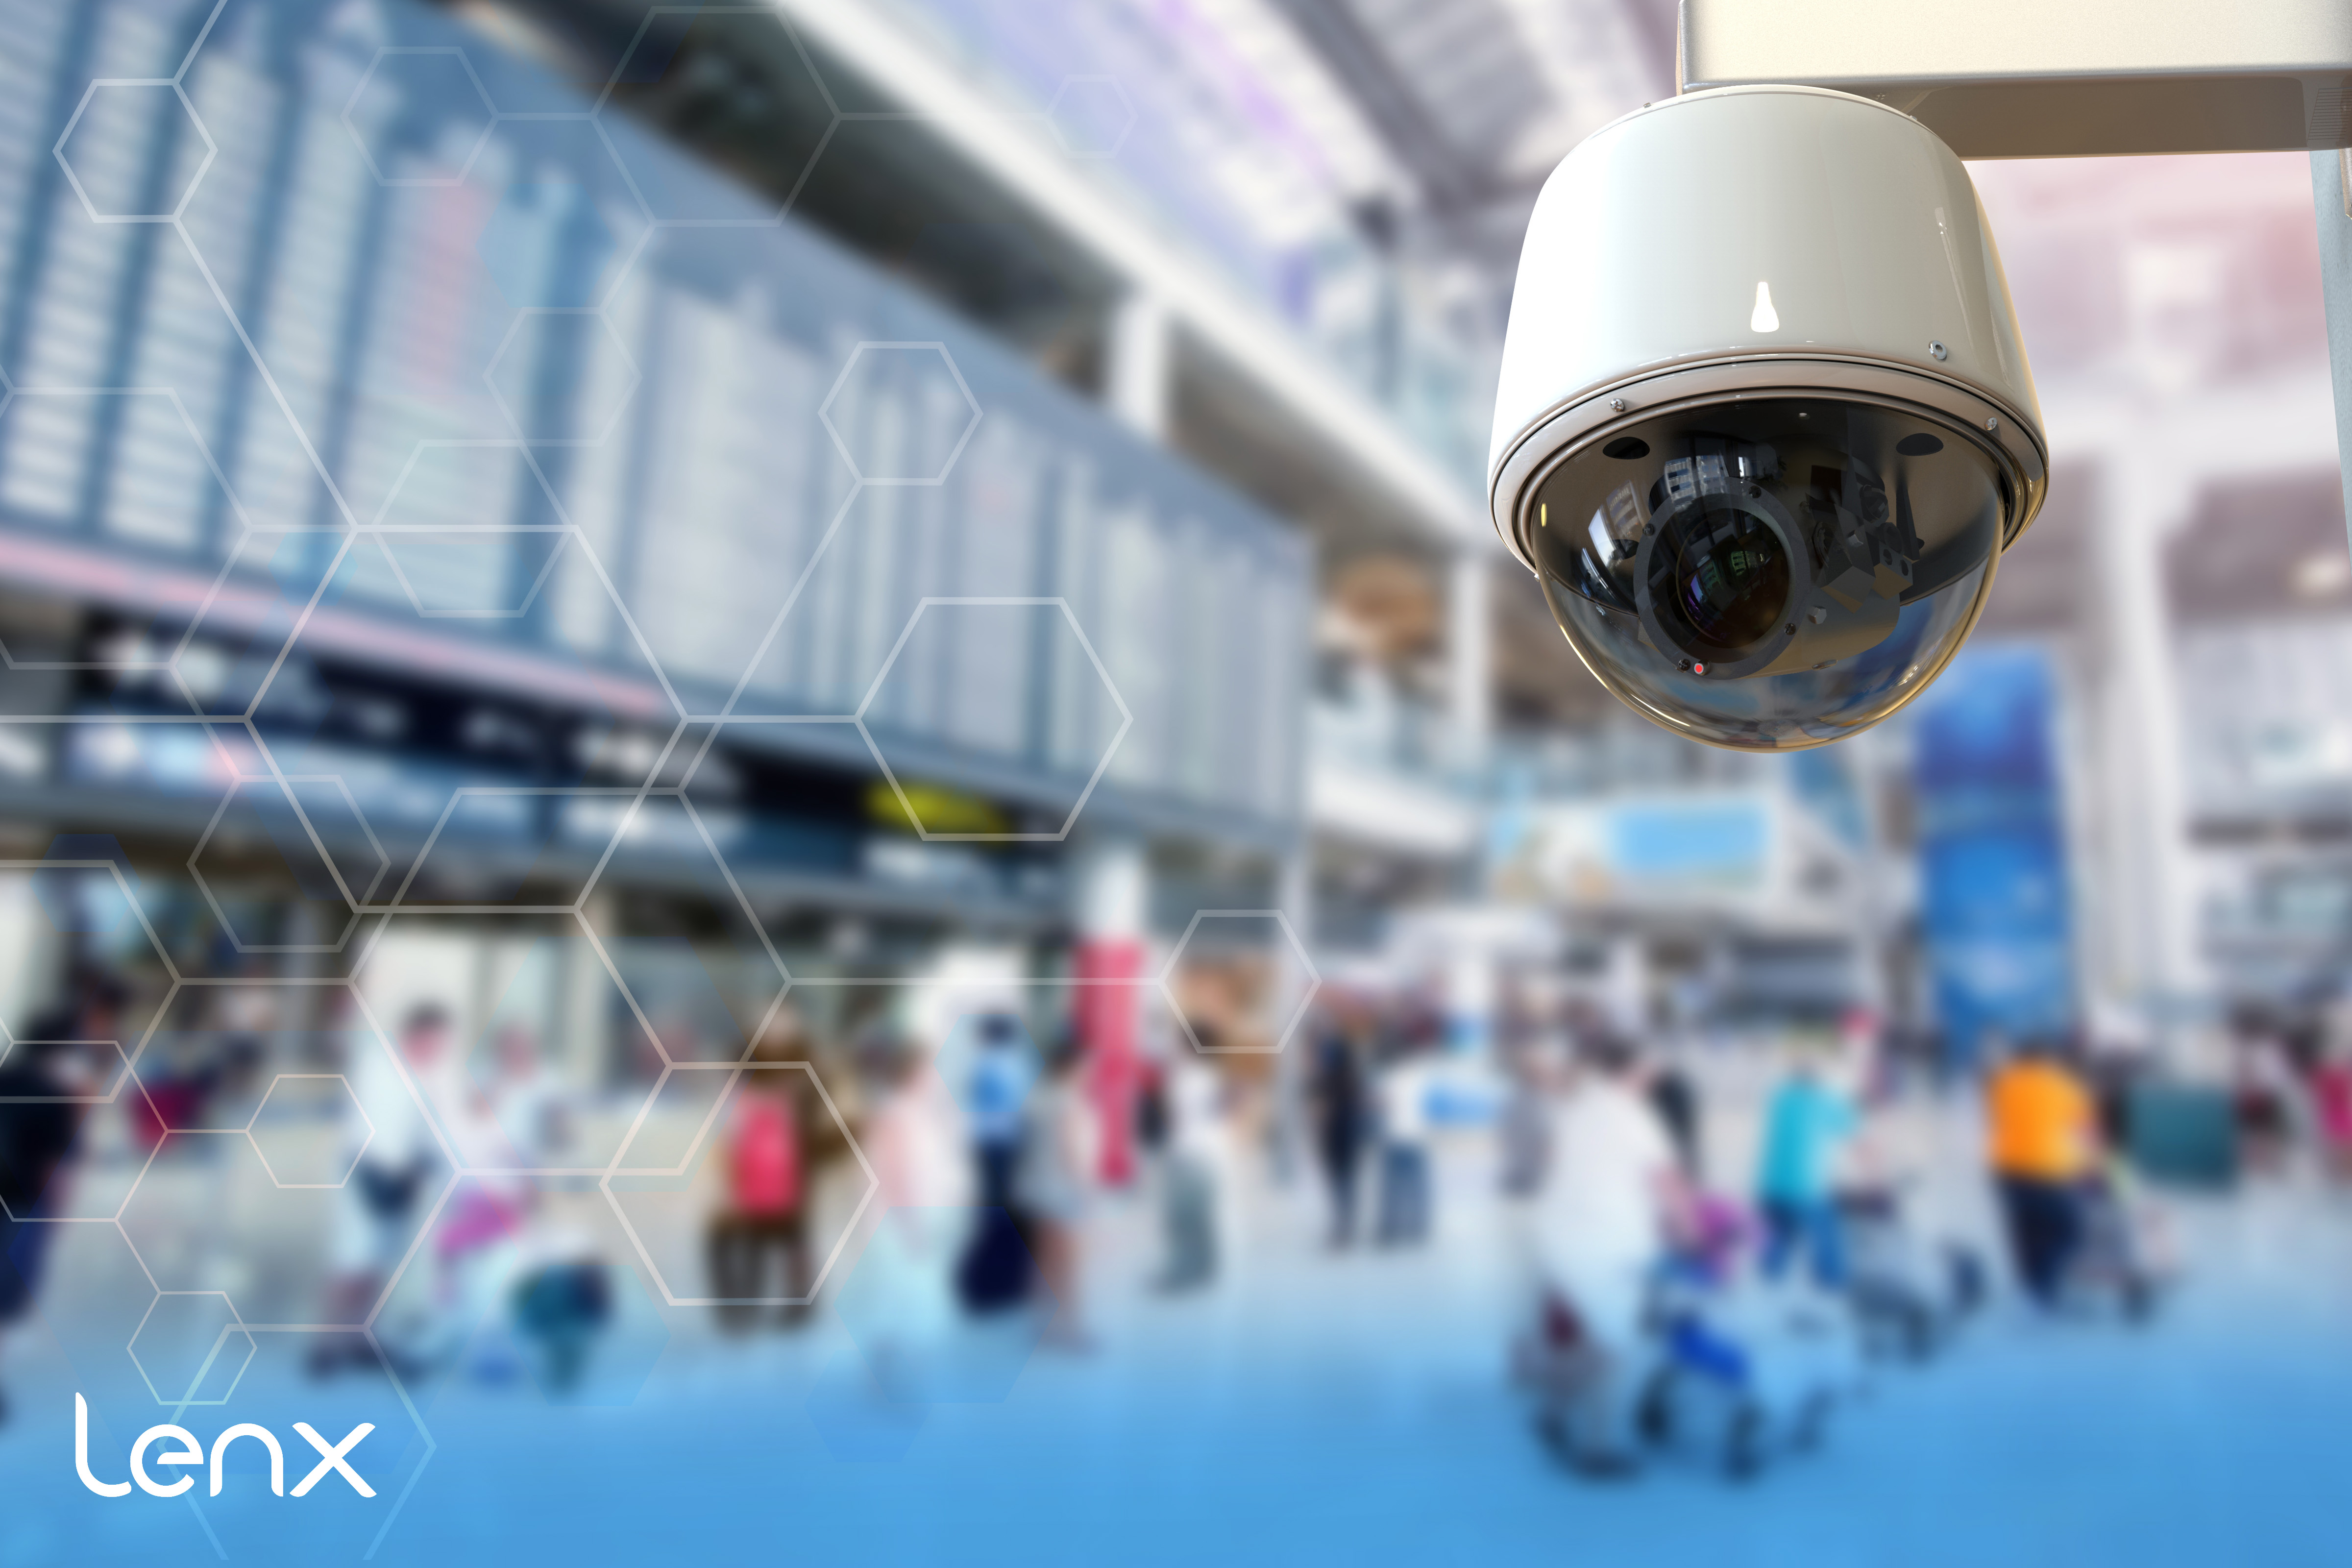 Advantages of AI Security and Active Shooter Detection Over Traditional Security